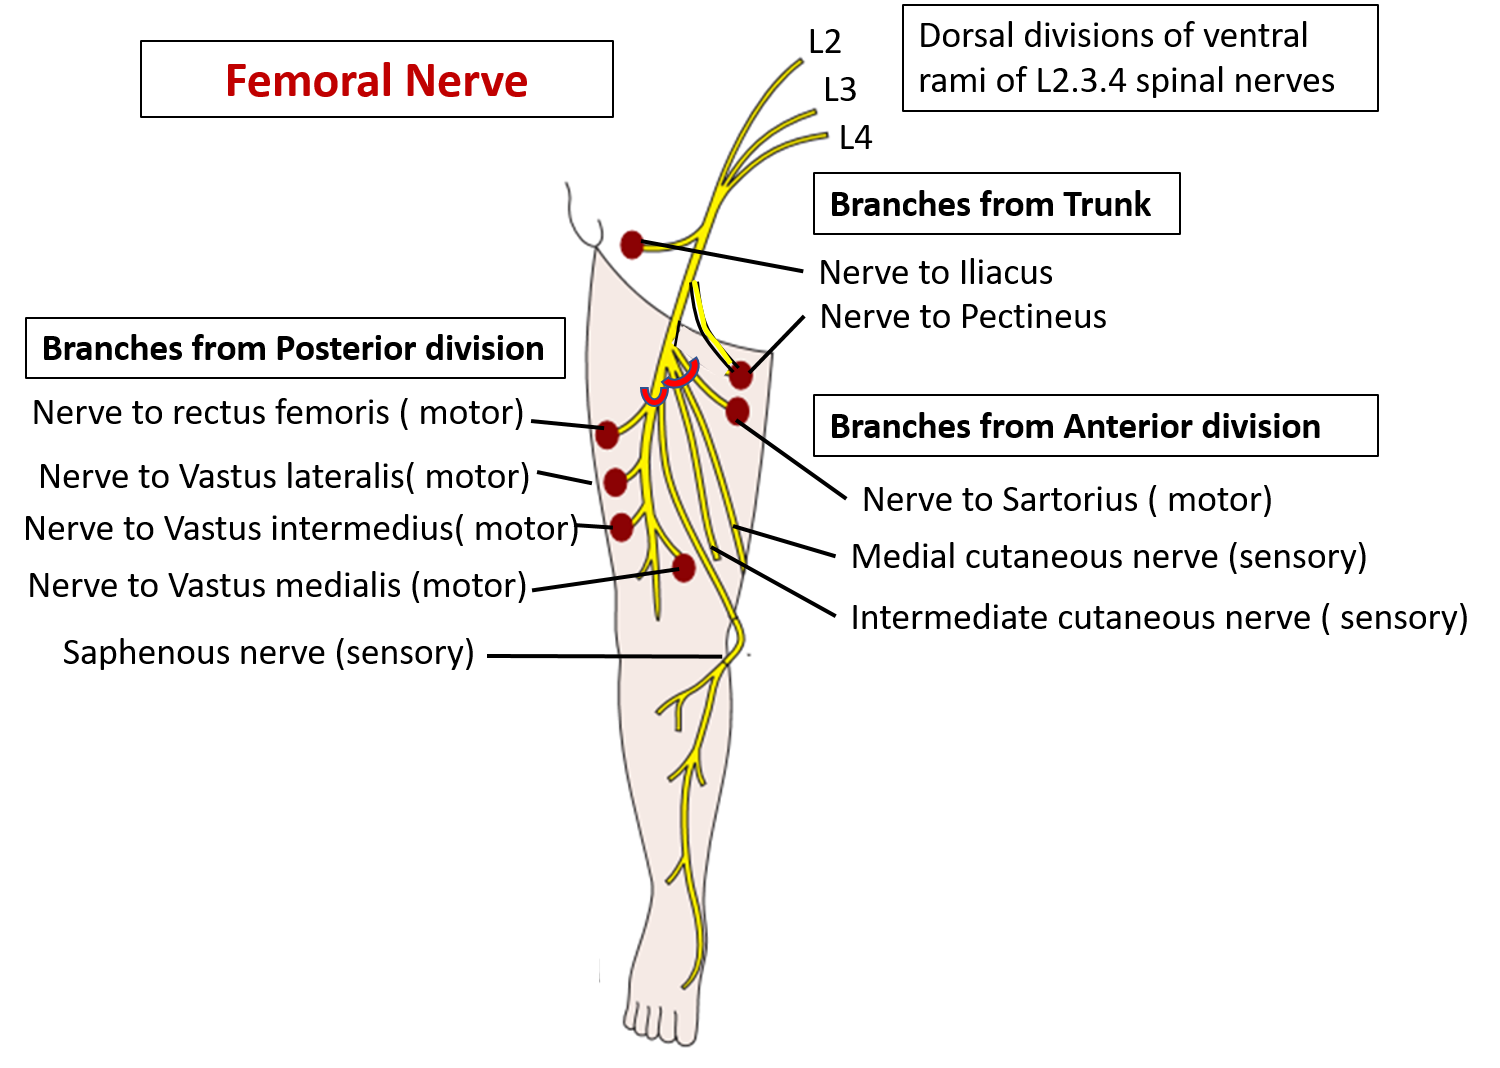 What is the common site of injury to femoral nerve?